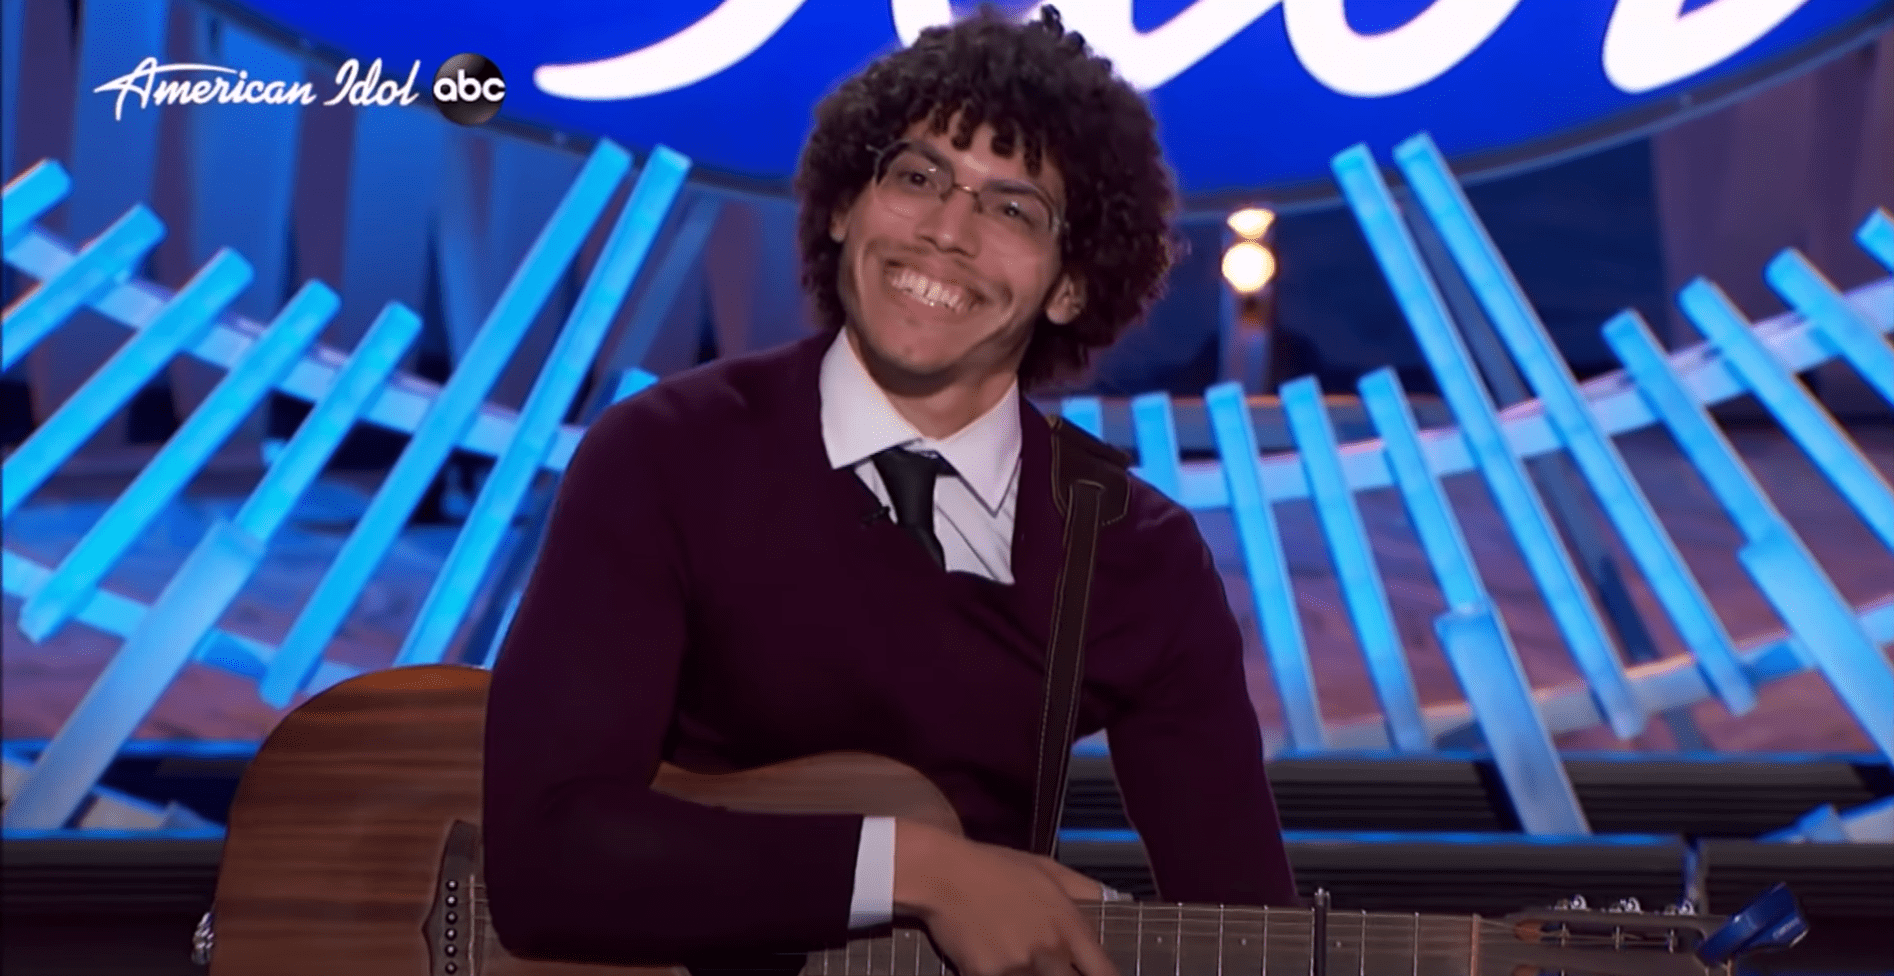 Philip Murphy prepares to audition for the "American Idol" season 19 judges on March 7, 2021. | Source: Youtube/Talent Recap 